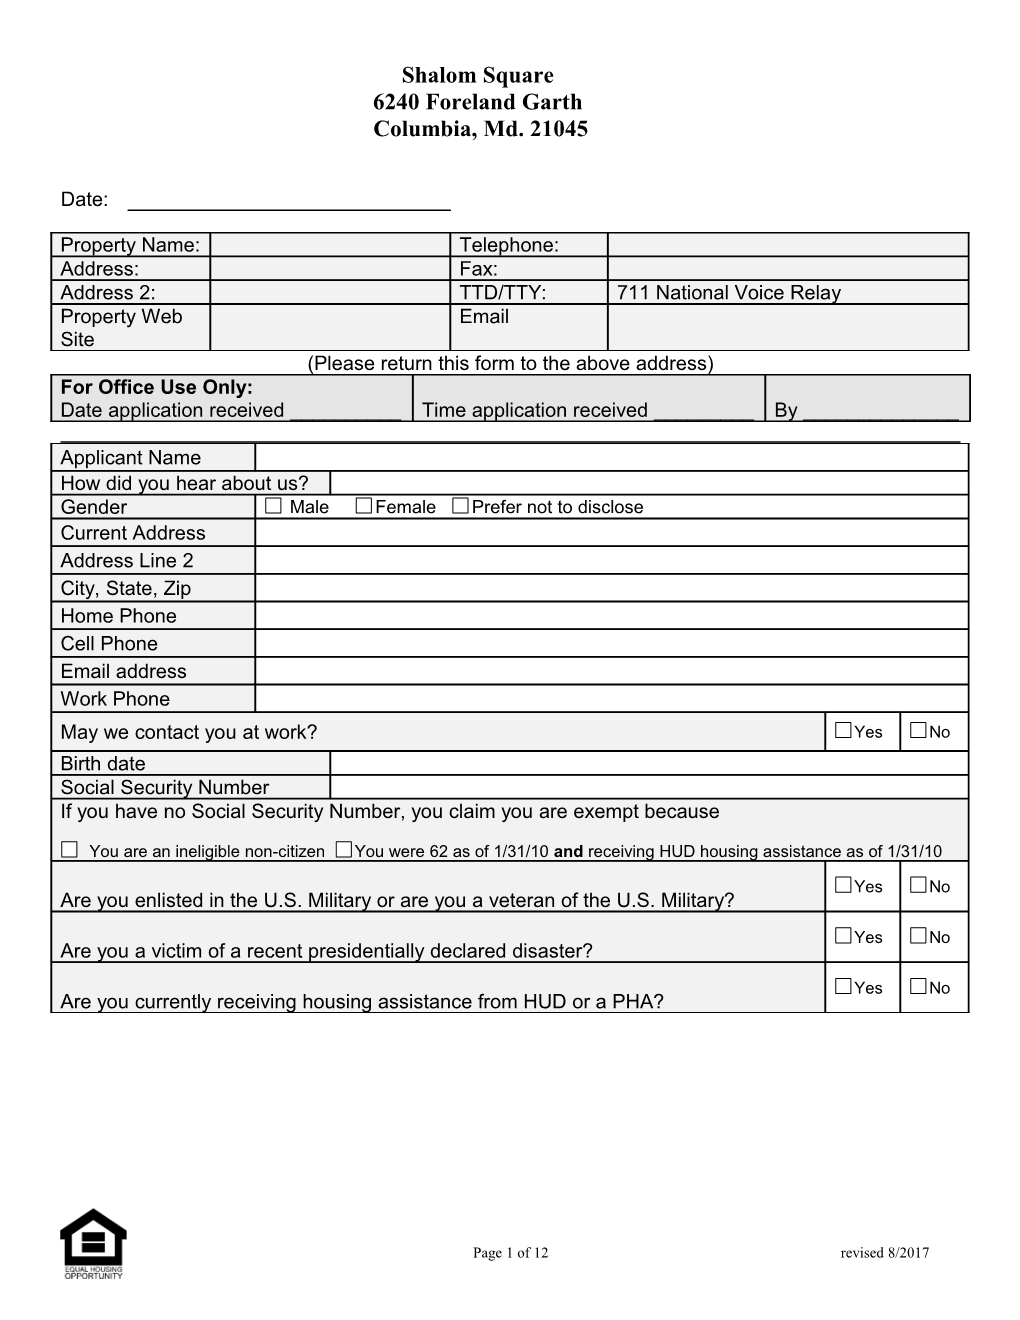 Please Return This Form to the Above Address